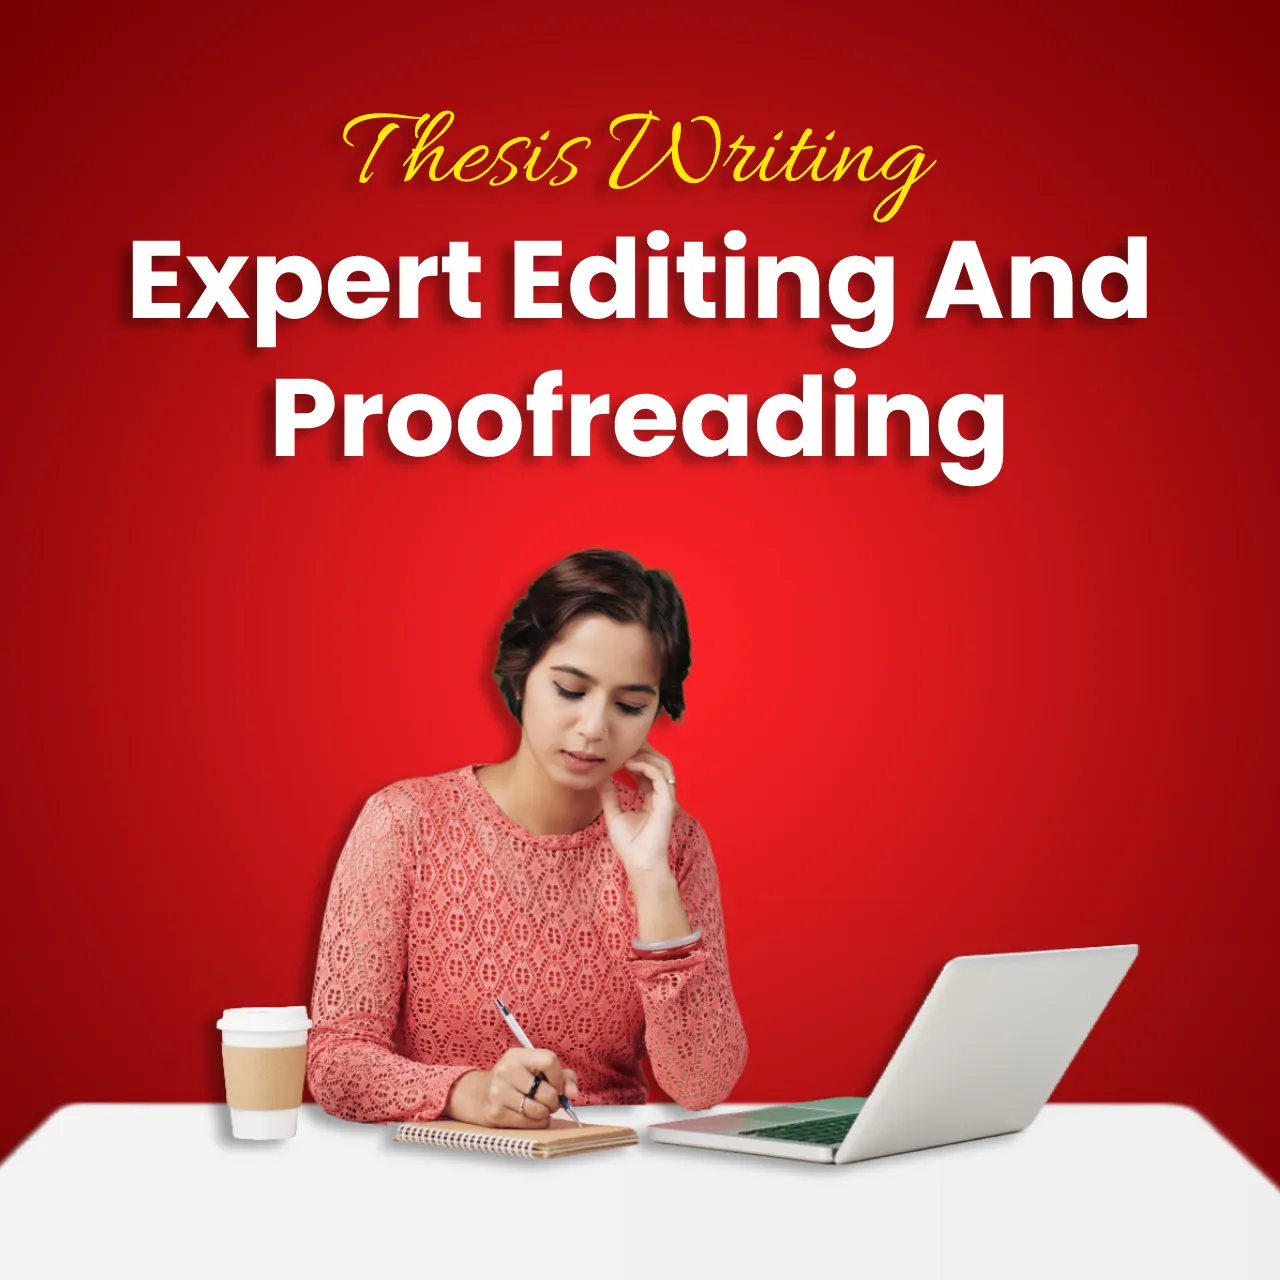 proofreading thesis